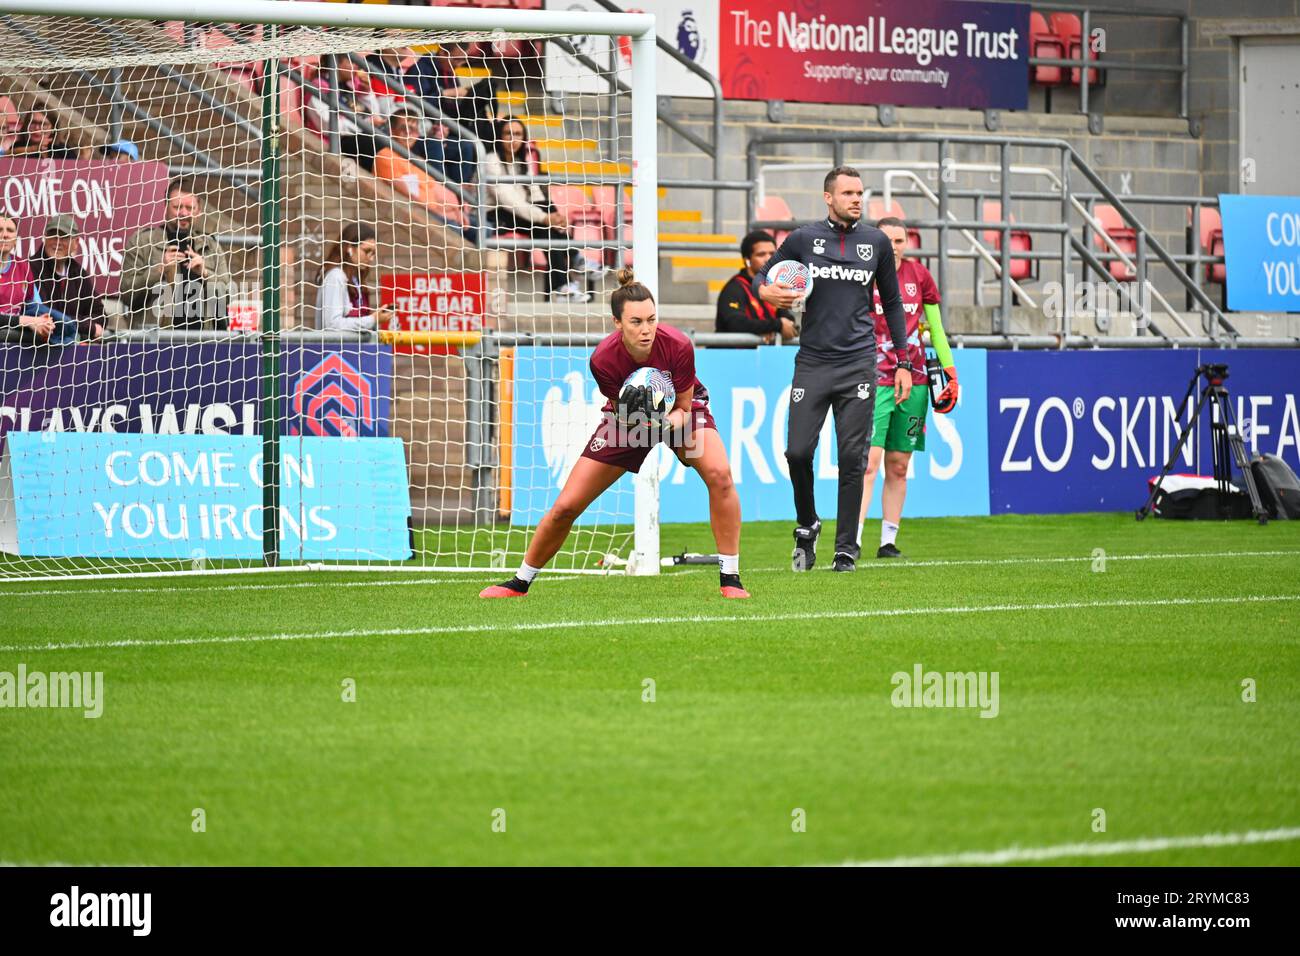 LONDON, ENGLAND - OCTOBER 01: Mackenzie Arnold  warming up with West Ham Women v Manchester City Women in the WSL Stock Photo